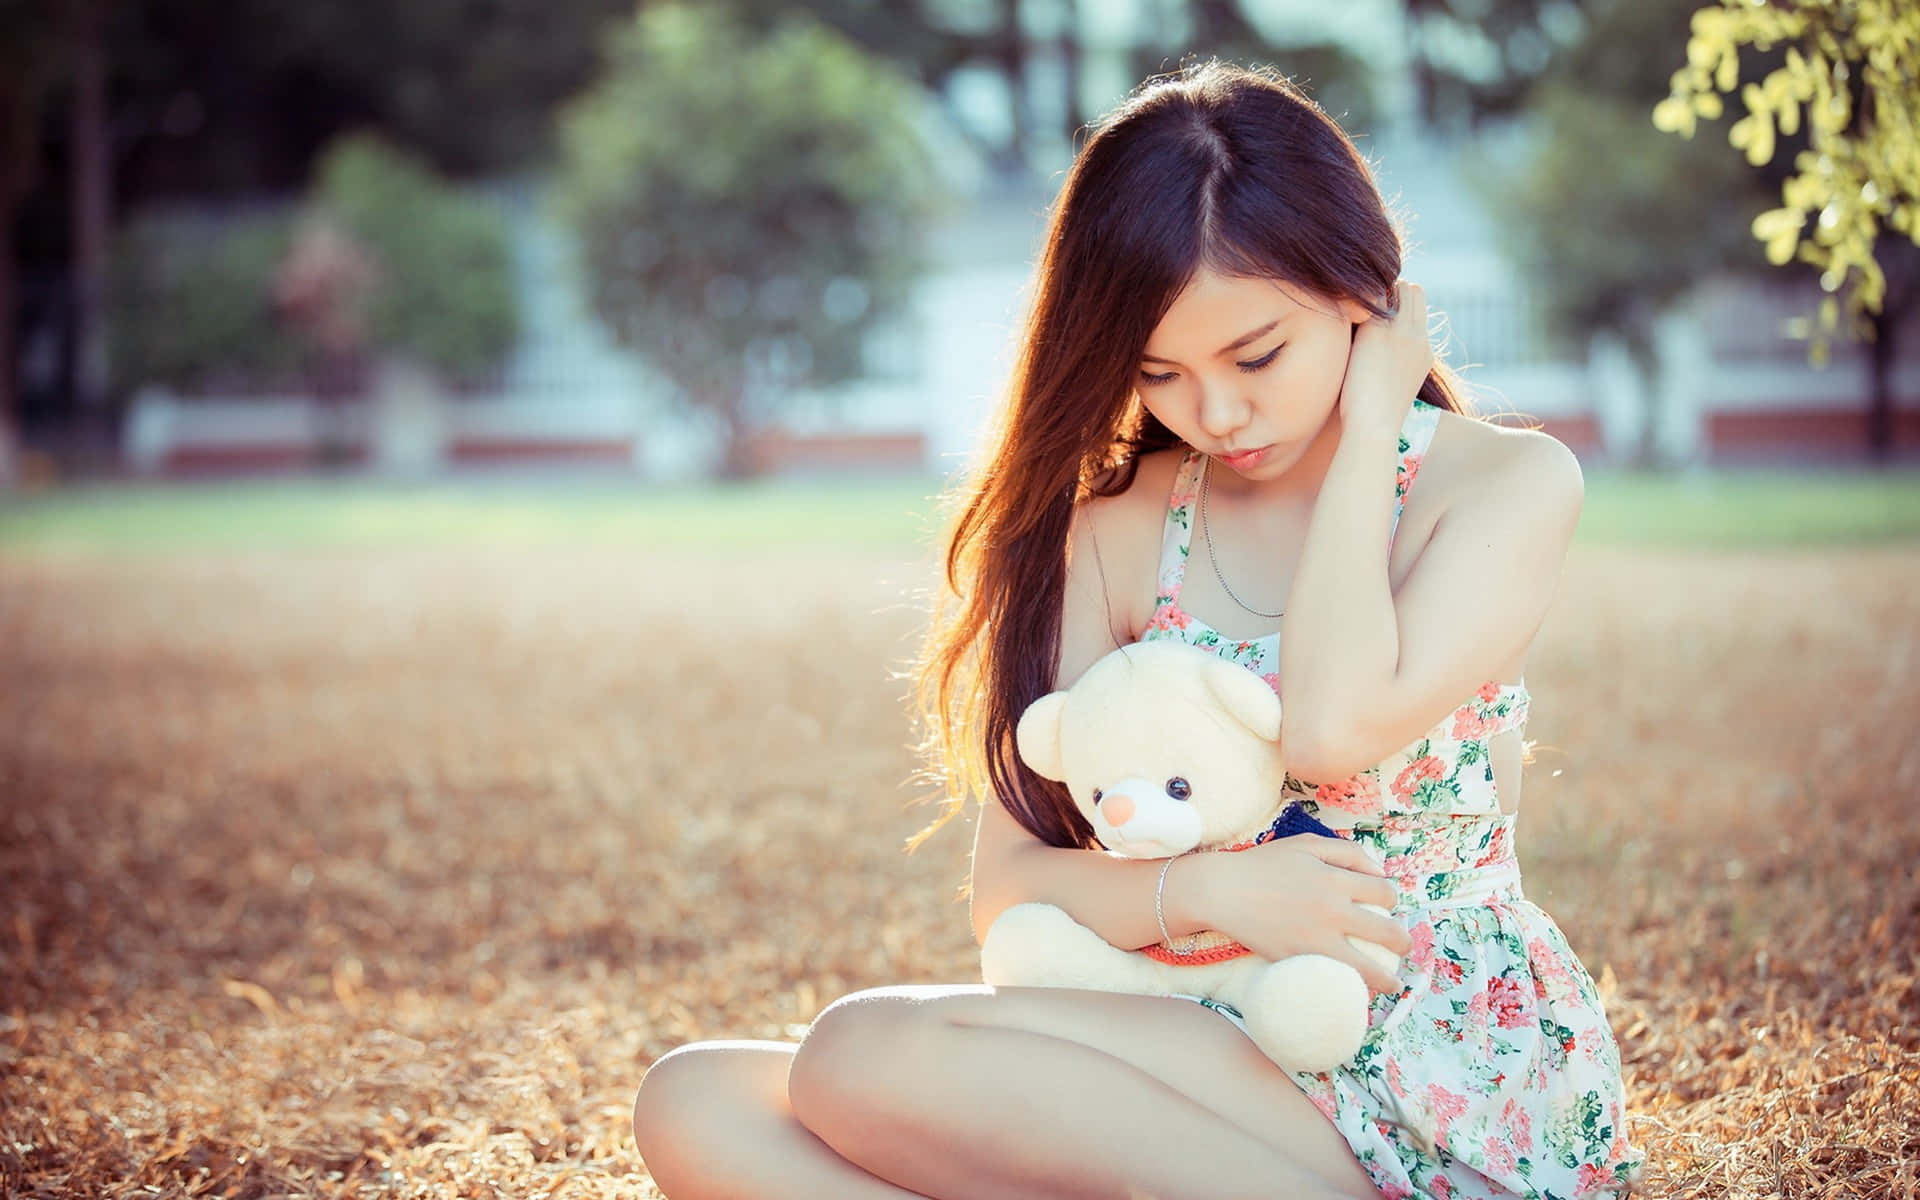 Teen Girl Holding Teddy Bear Picture